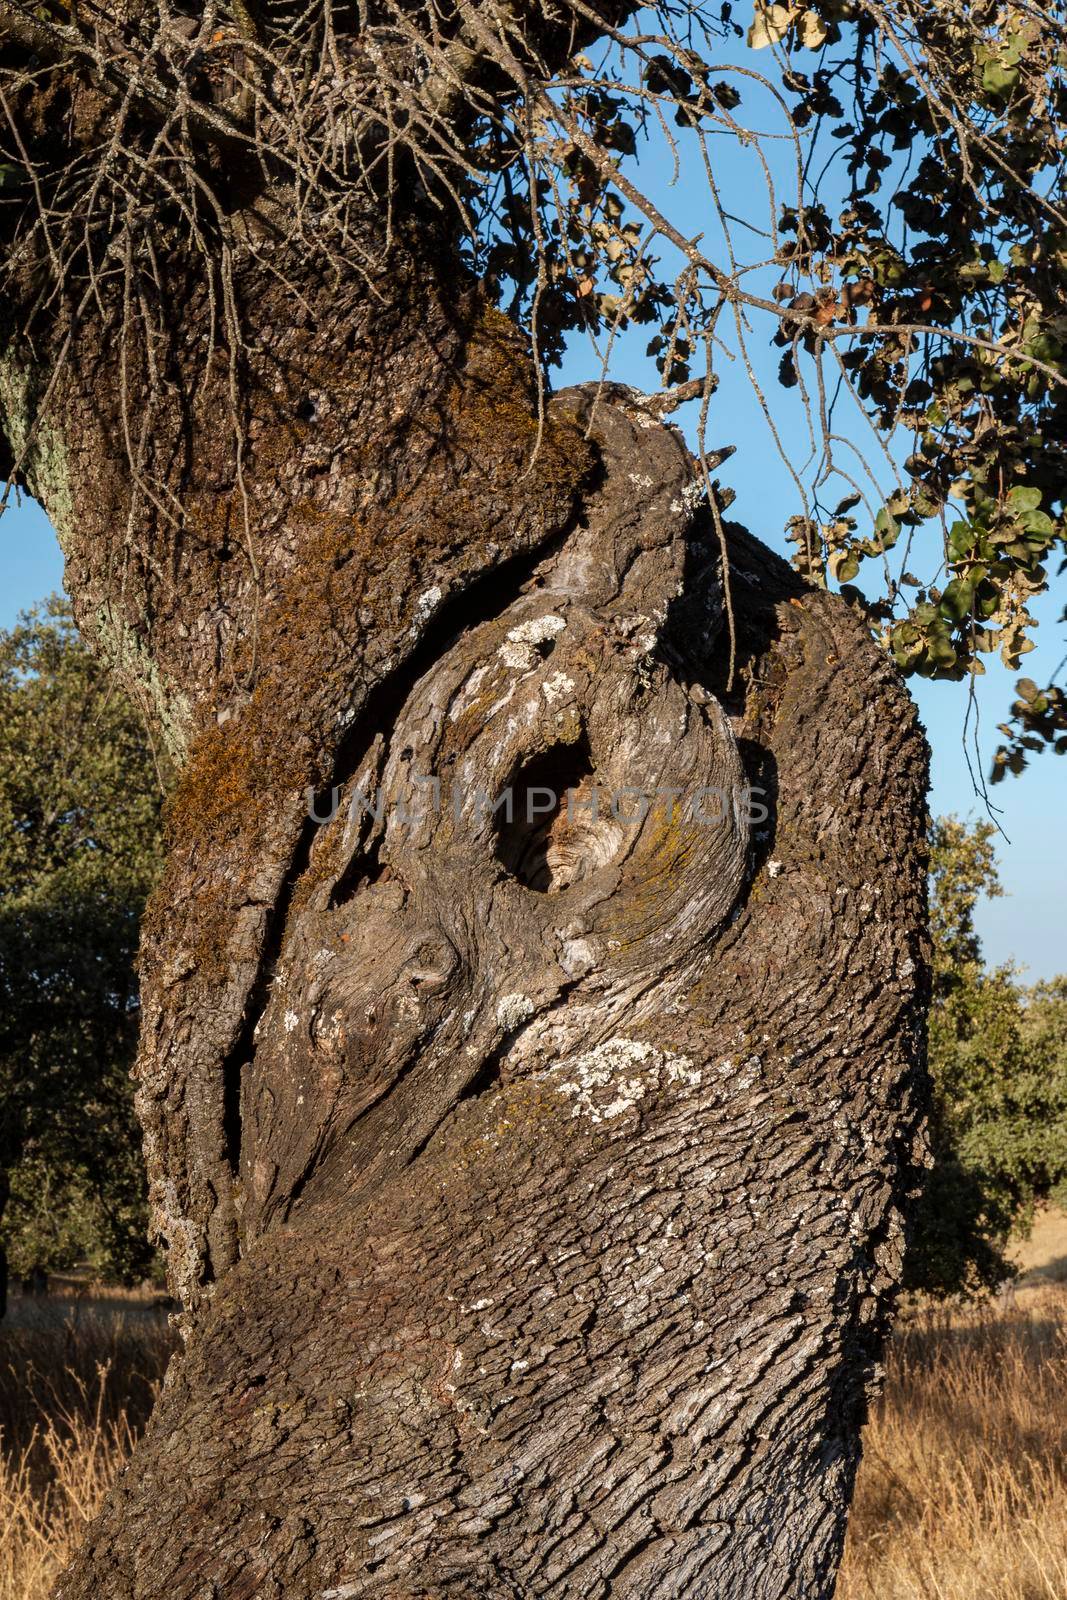 Trunk of an old acorn tree at sunset in southern Andalusia, Spain